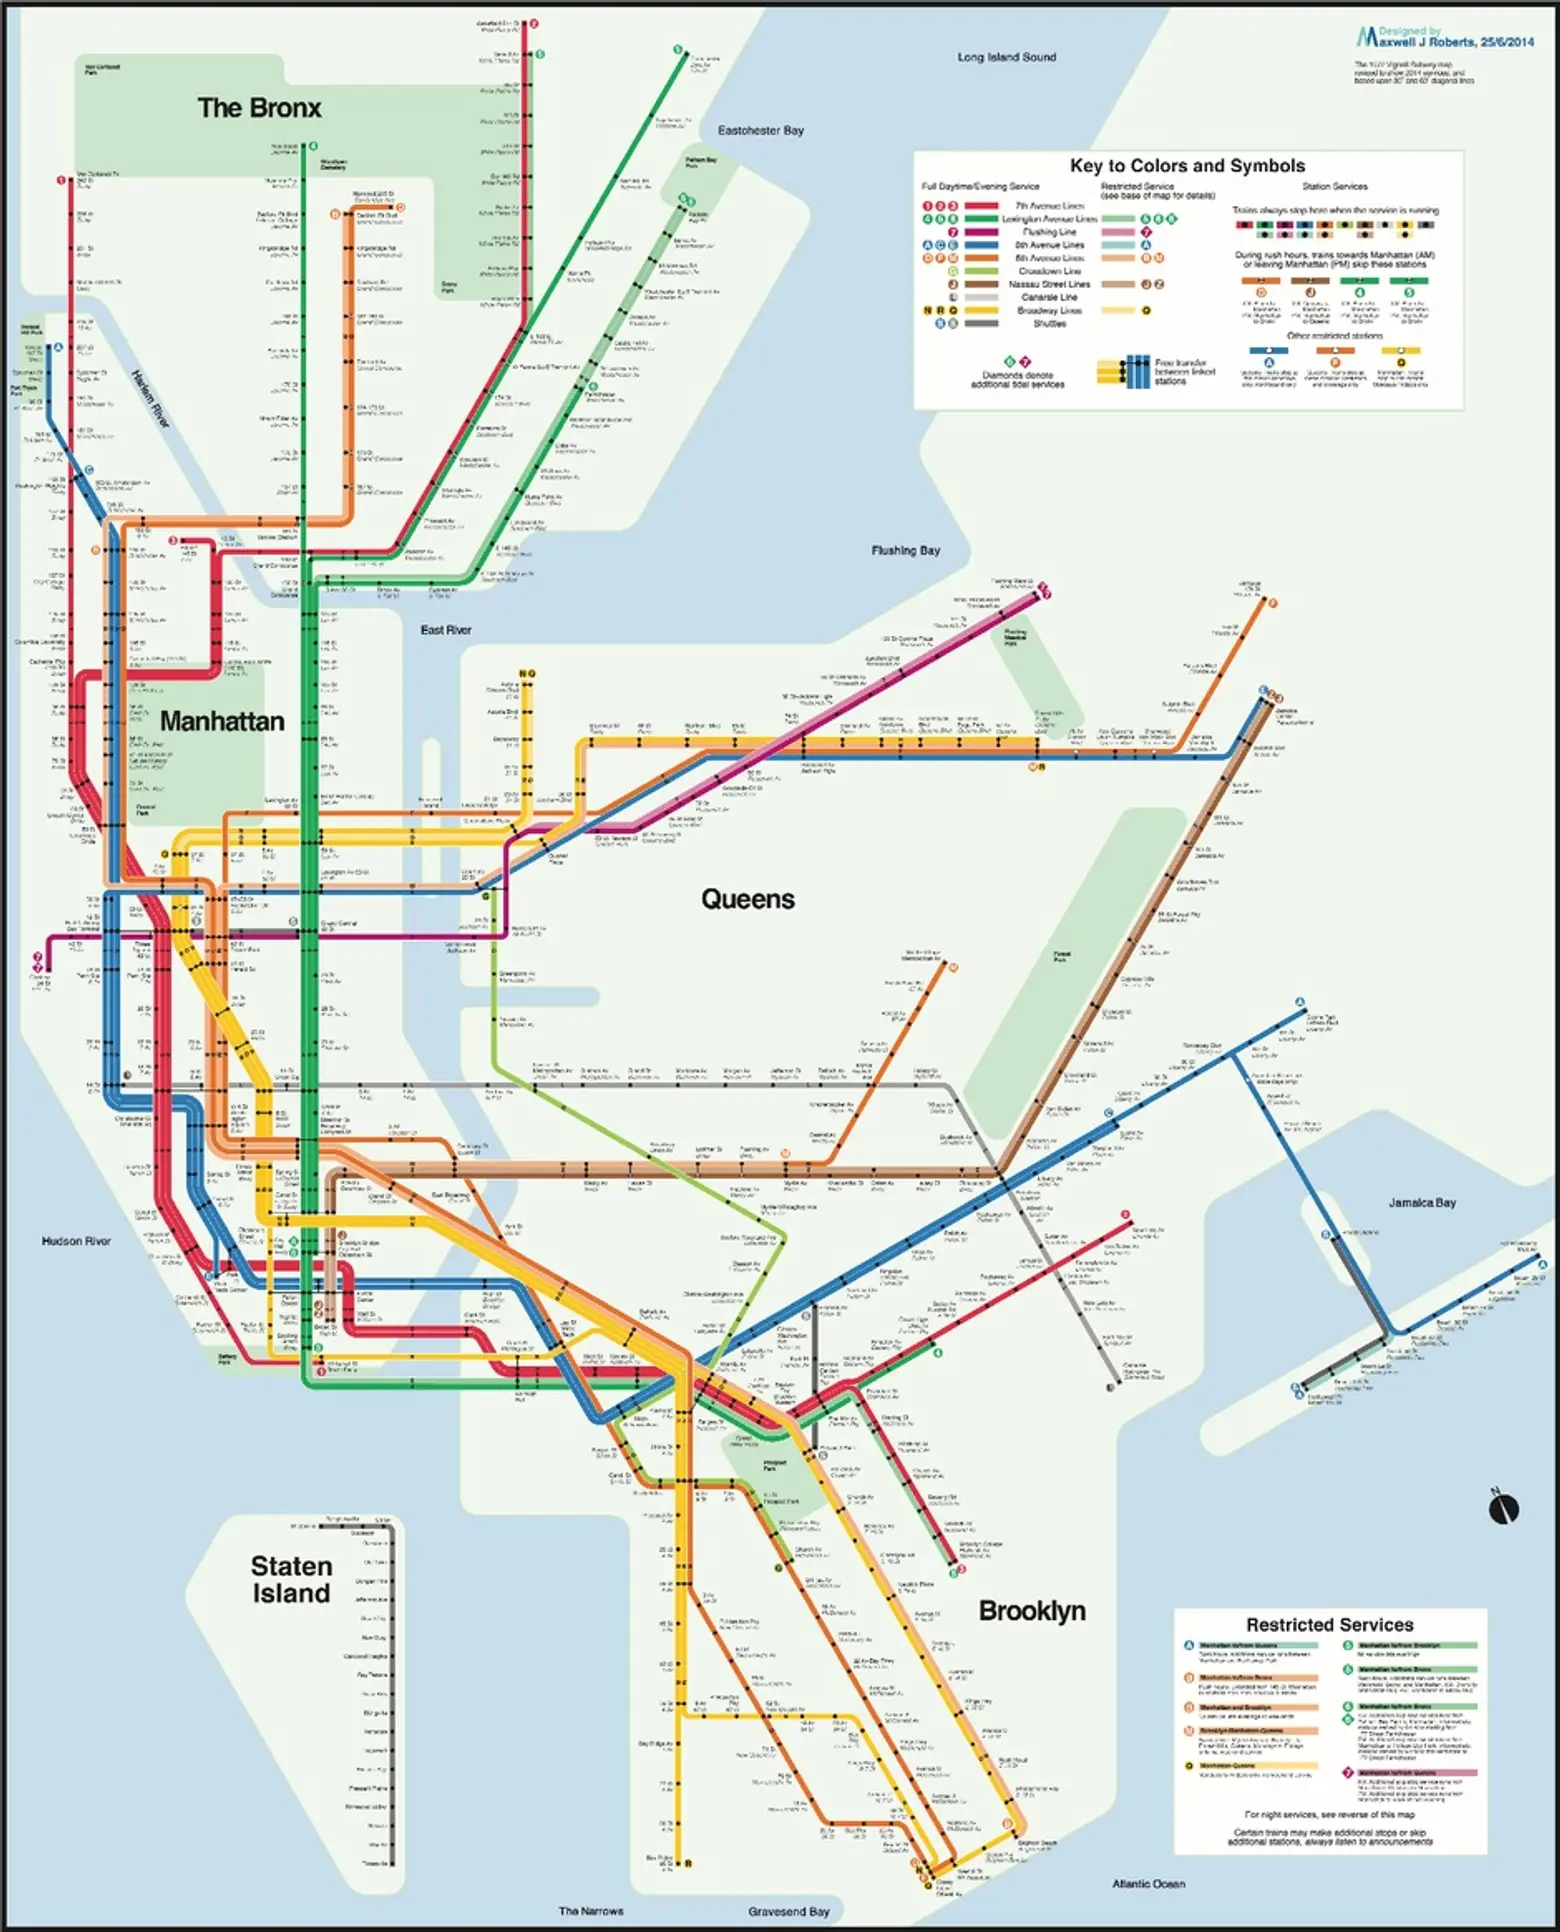 Map Enthusiast Creates a More Geographically Correct Version of Vignelli’s Old Subway Map